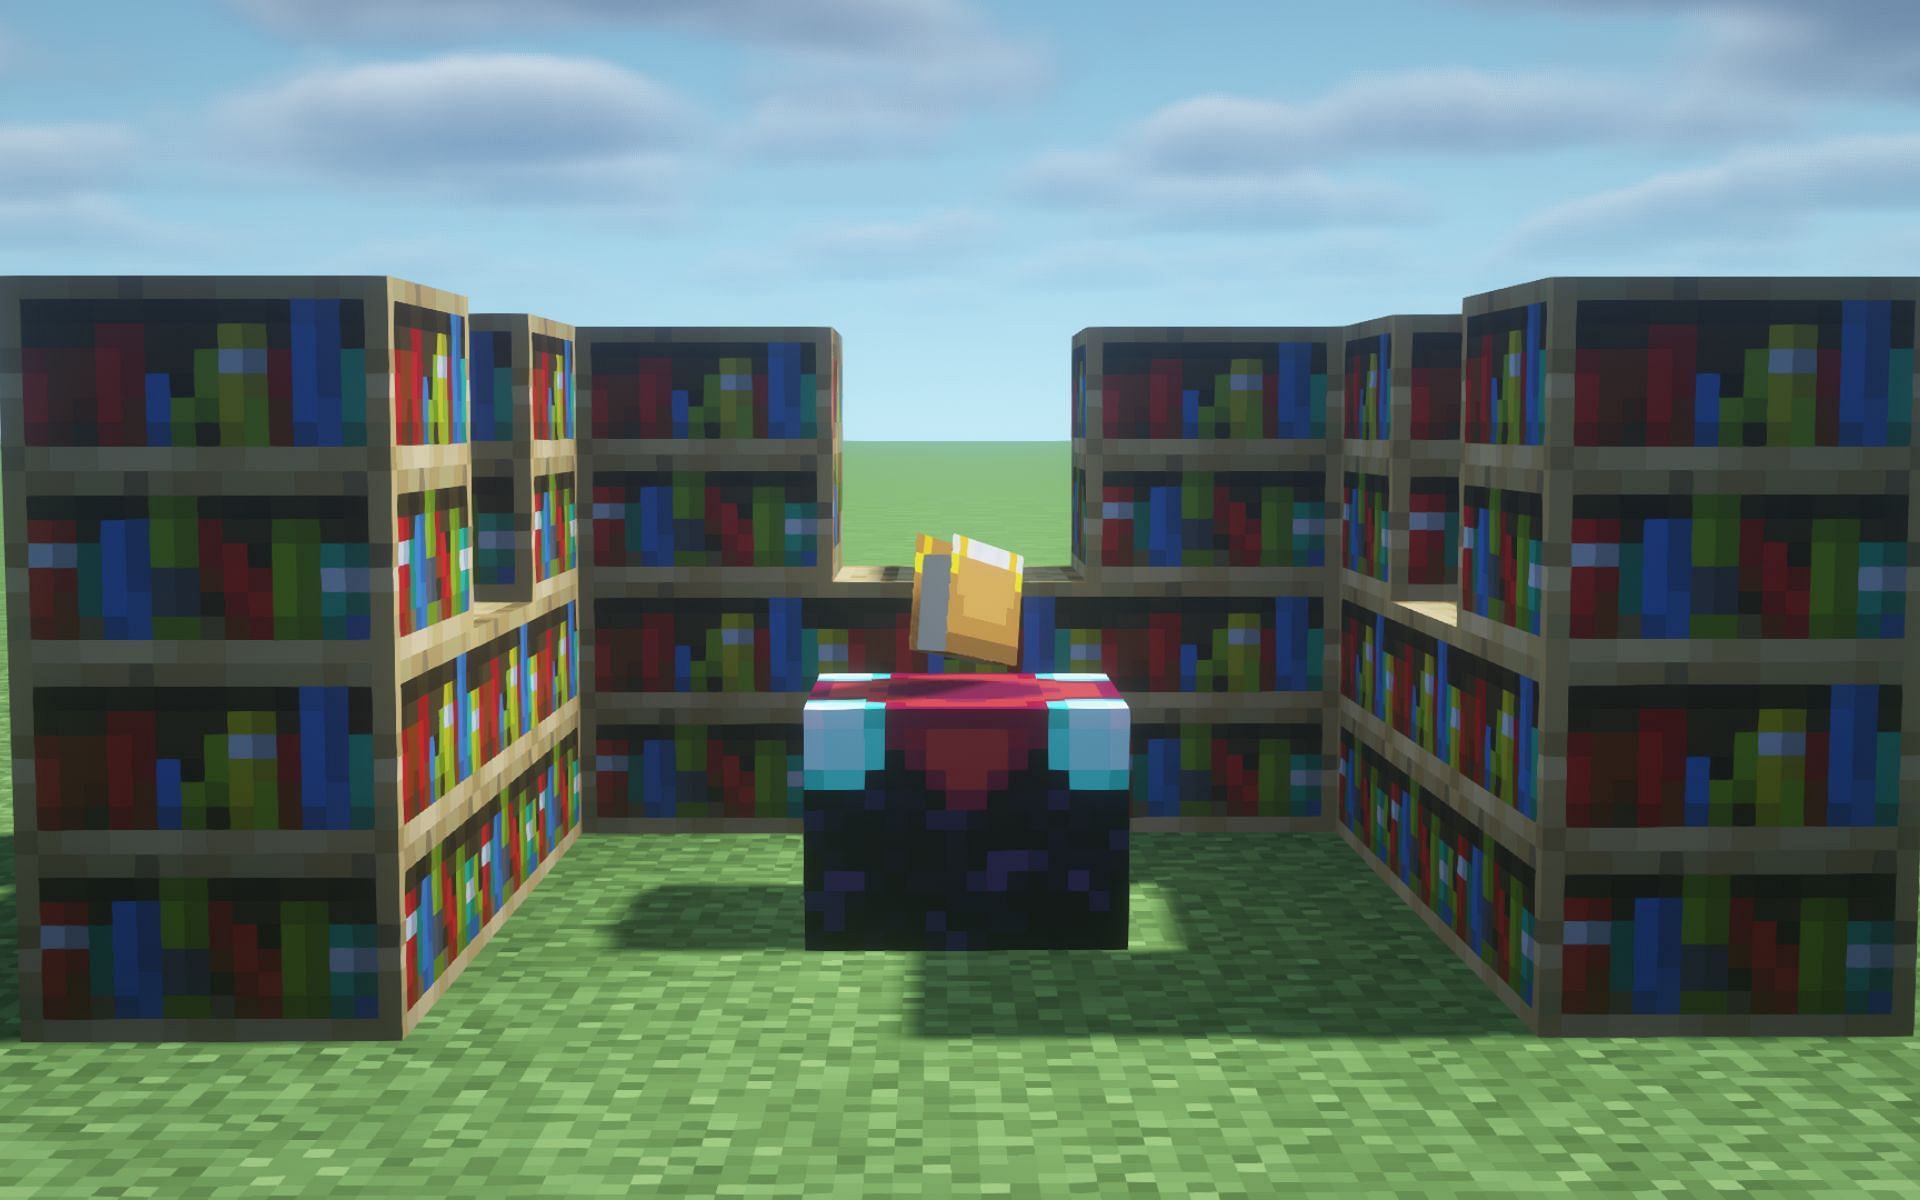 Enchanting table with bookshelves to increase the quality of enchantments in Minecraft (Image via Mojang)